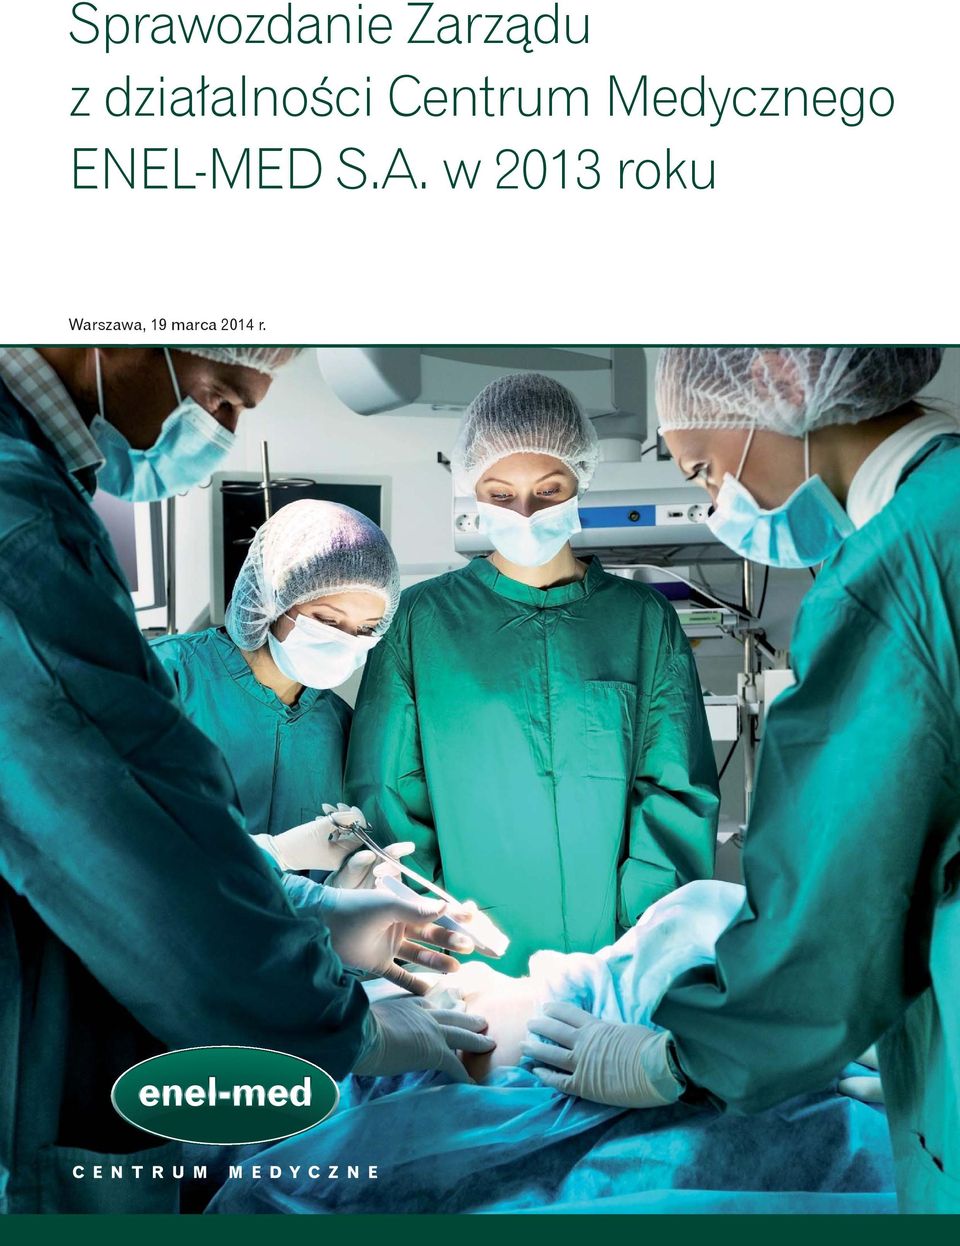 Medycznego ENEL-MED S.A.